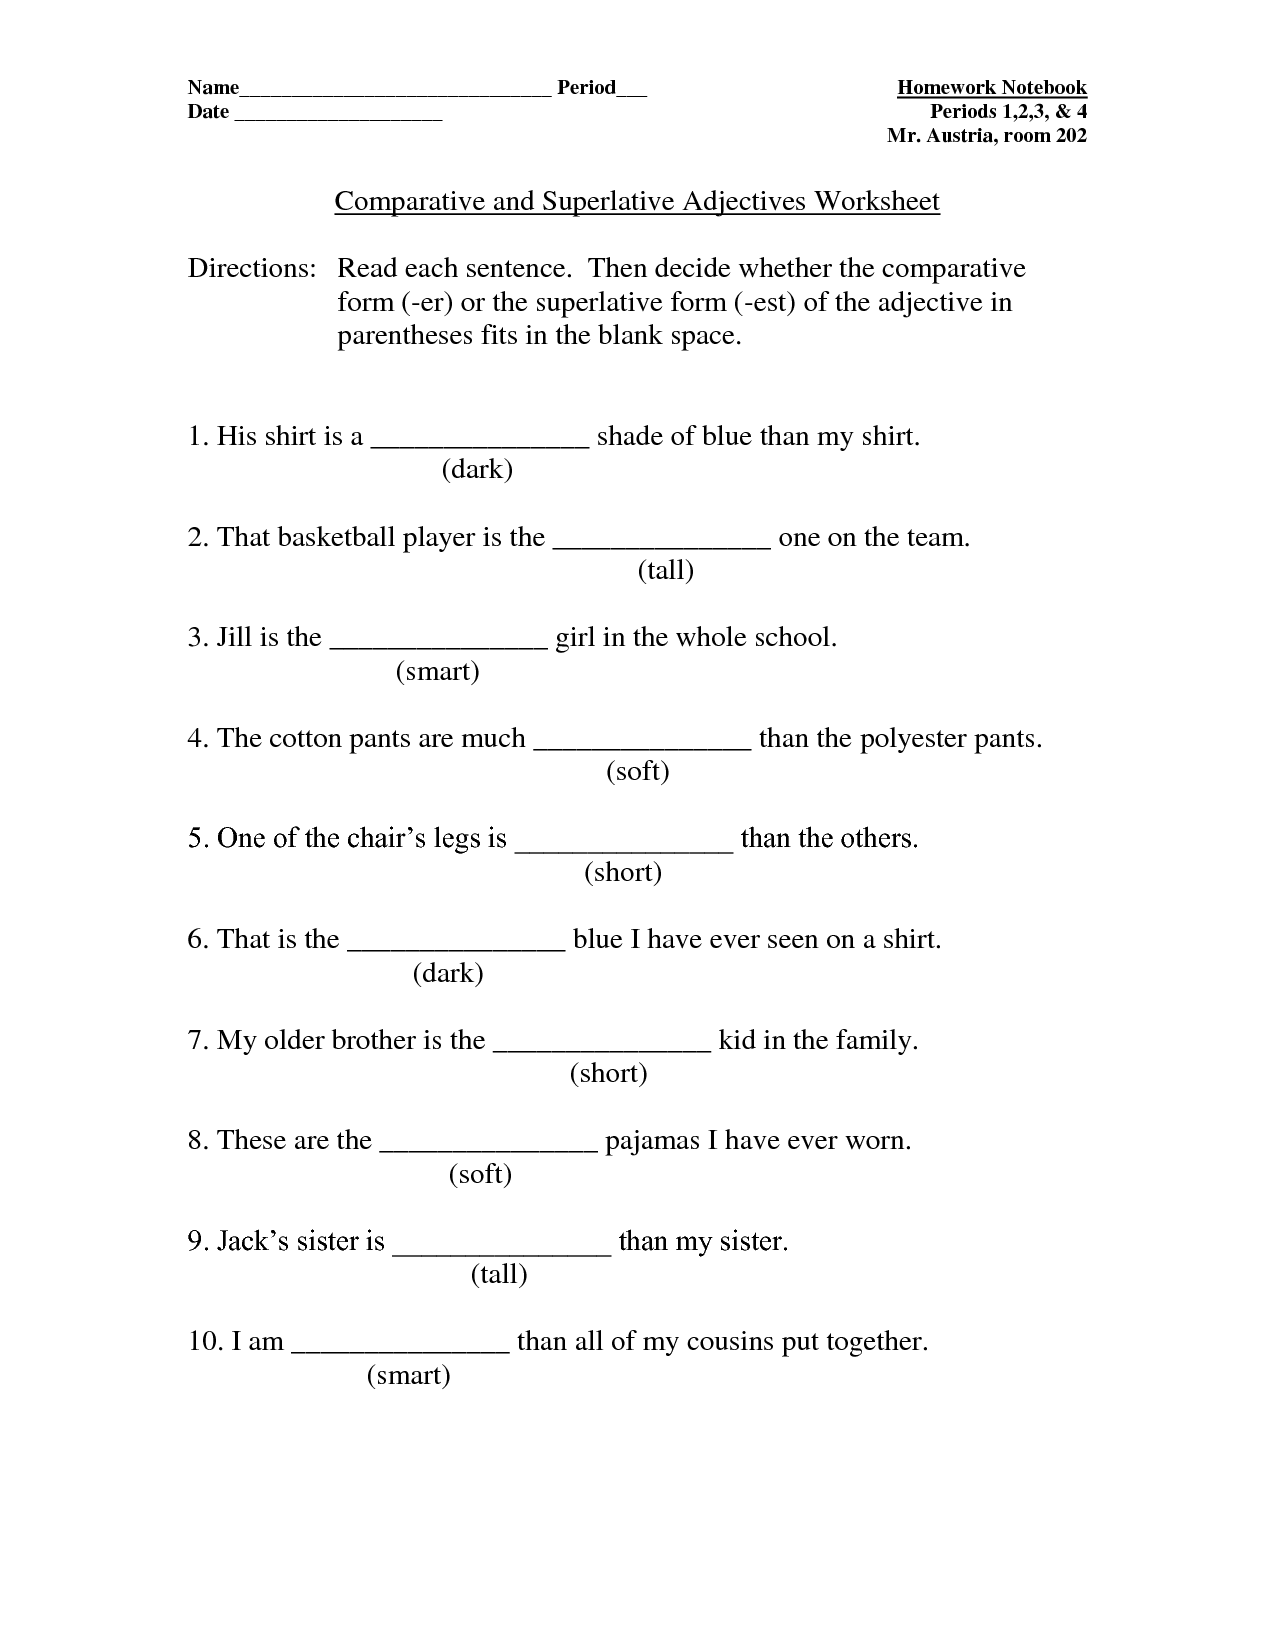 16 Best Images Of Adjectives That Compare Worksheets Comparative Adjectives Worksheets 3rd